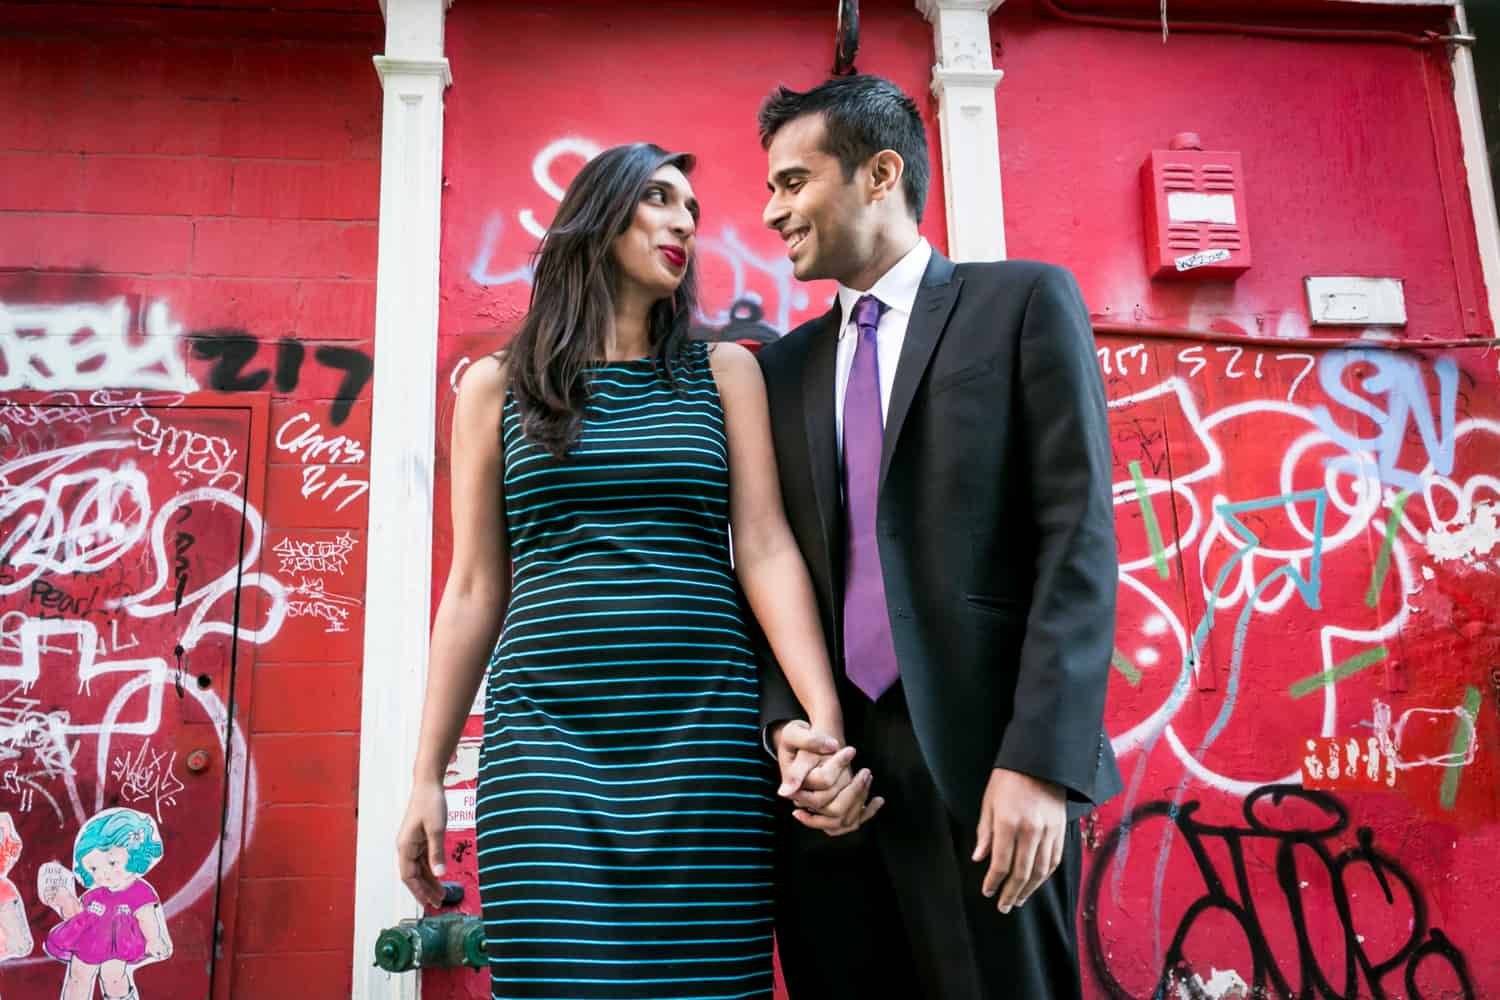 Couple holding hands in front of red graffiti wall in Tribeca